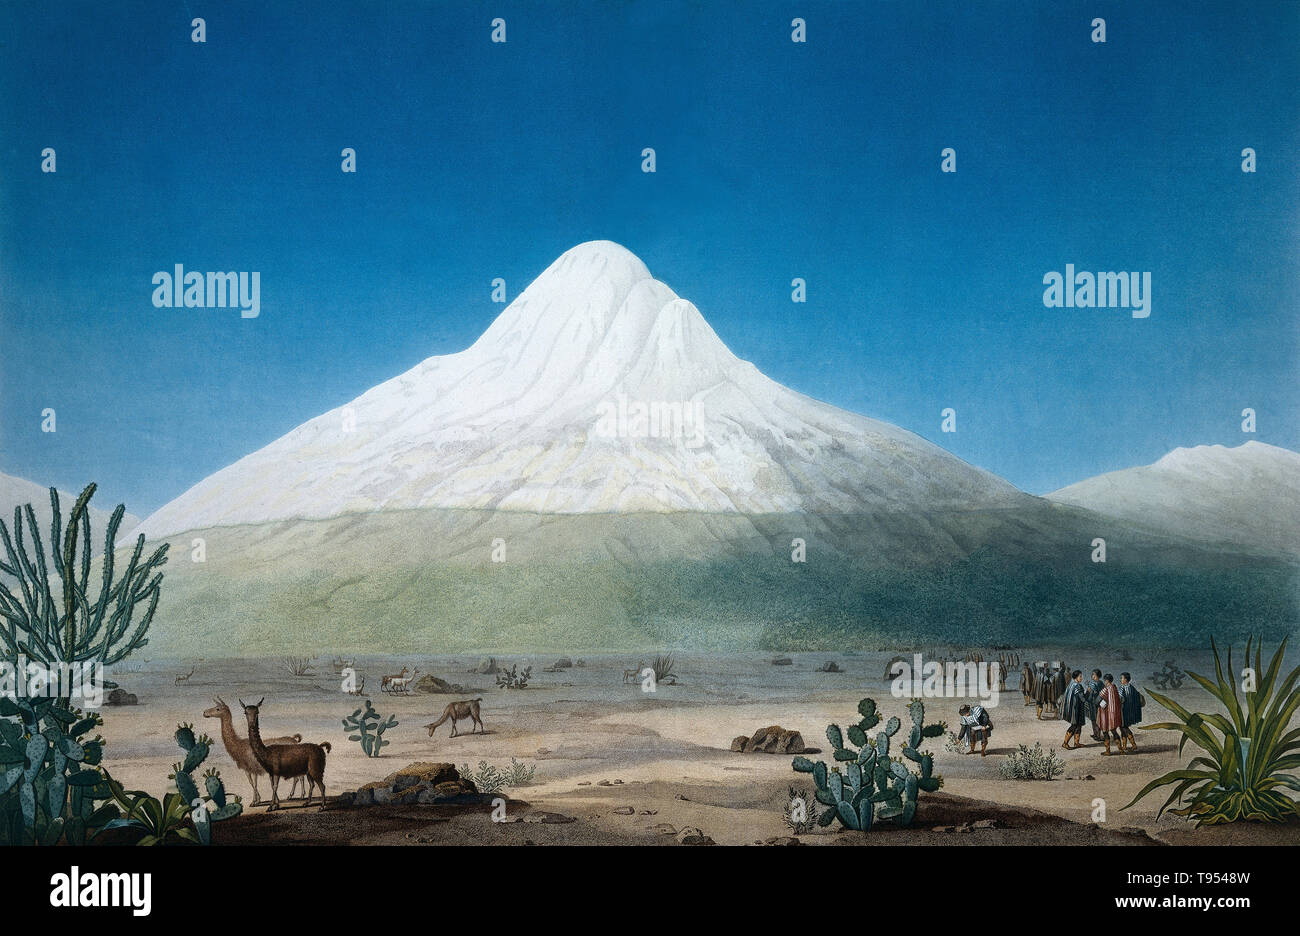 Mount Chimborazo, as seen by the explorer and naturalist Alexander von Humboldt in the early 1800s. Chimborazo is a currently inactive stratovolcano in the Cordillera Occidental range of the Andes. With a peak elevation of 6,263 m (20,548 ft), Chimborazo is the highest mountain in Ecuador. Alexander von Humboldt (1769-1859) was a Prussian geographer, naturalist and explorer. His quantitative work on botanical geography laid the foundation for the field of biogeography. Stock Photo